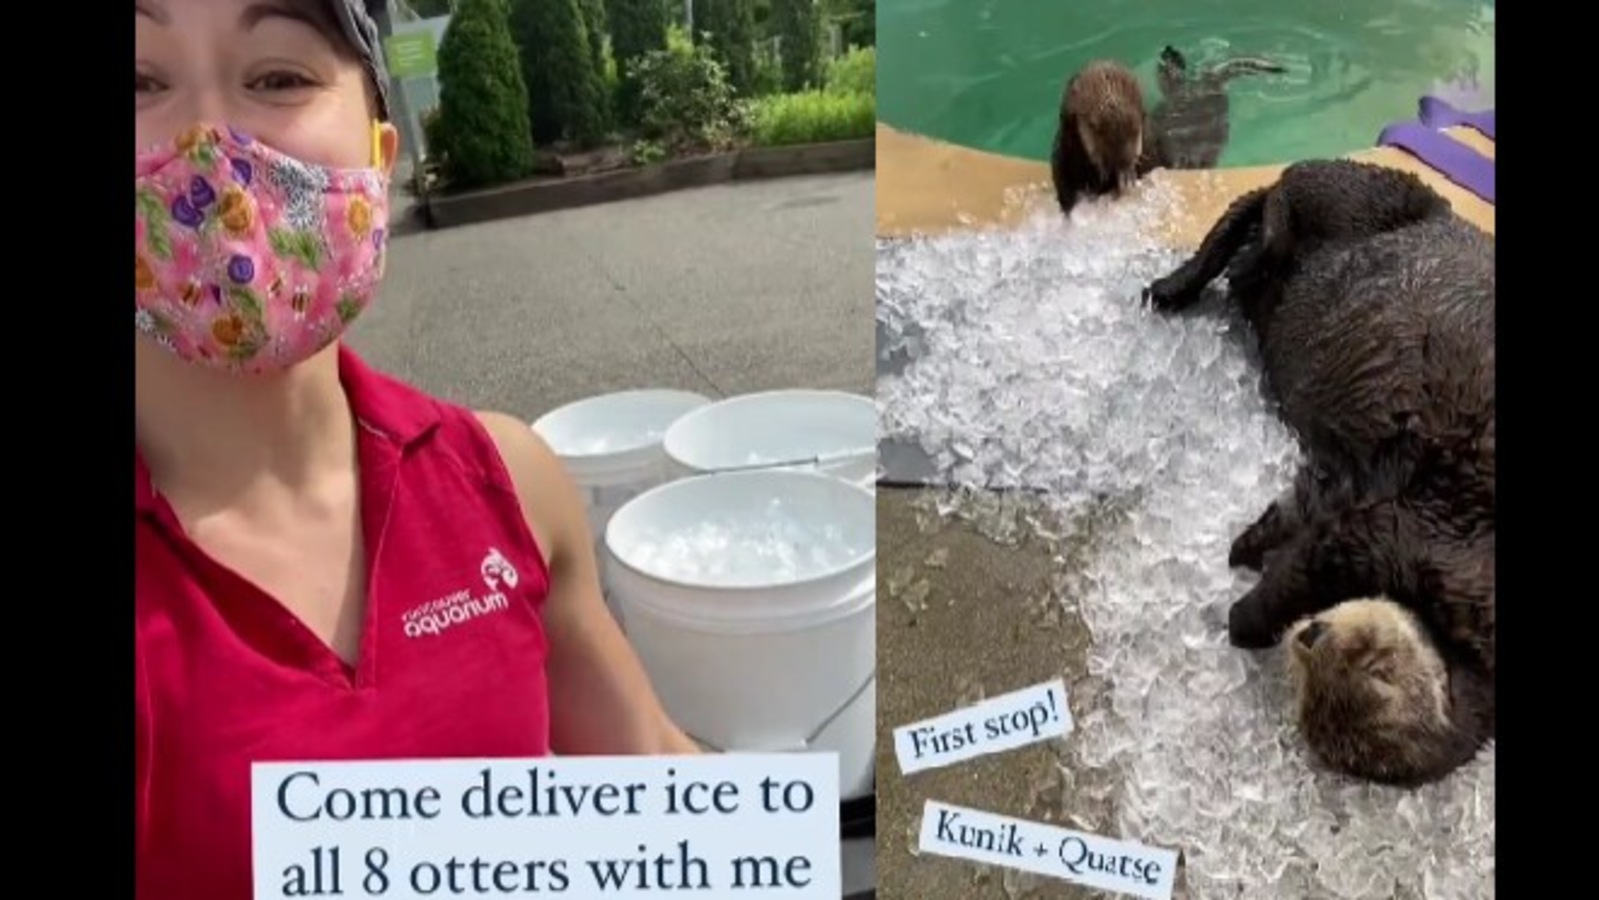 Woman Shares Clip Of Delivering Ice To Otters Best Job Ever Say Netizens Trending Hindustan Times